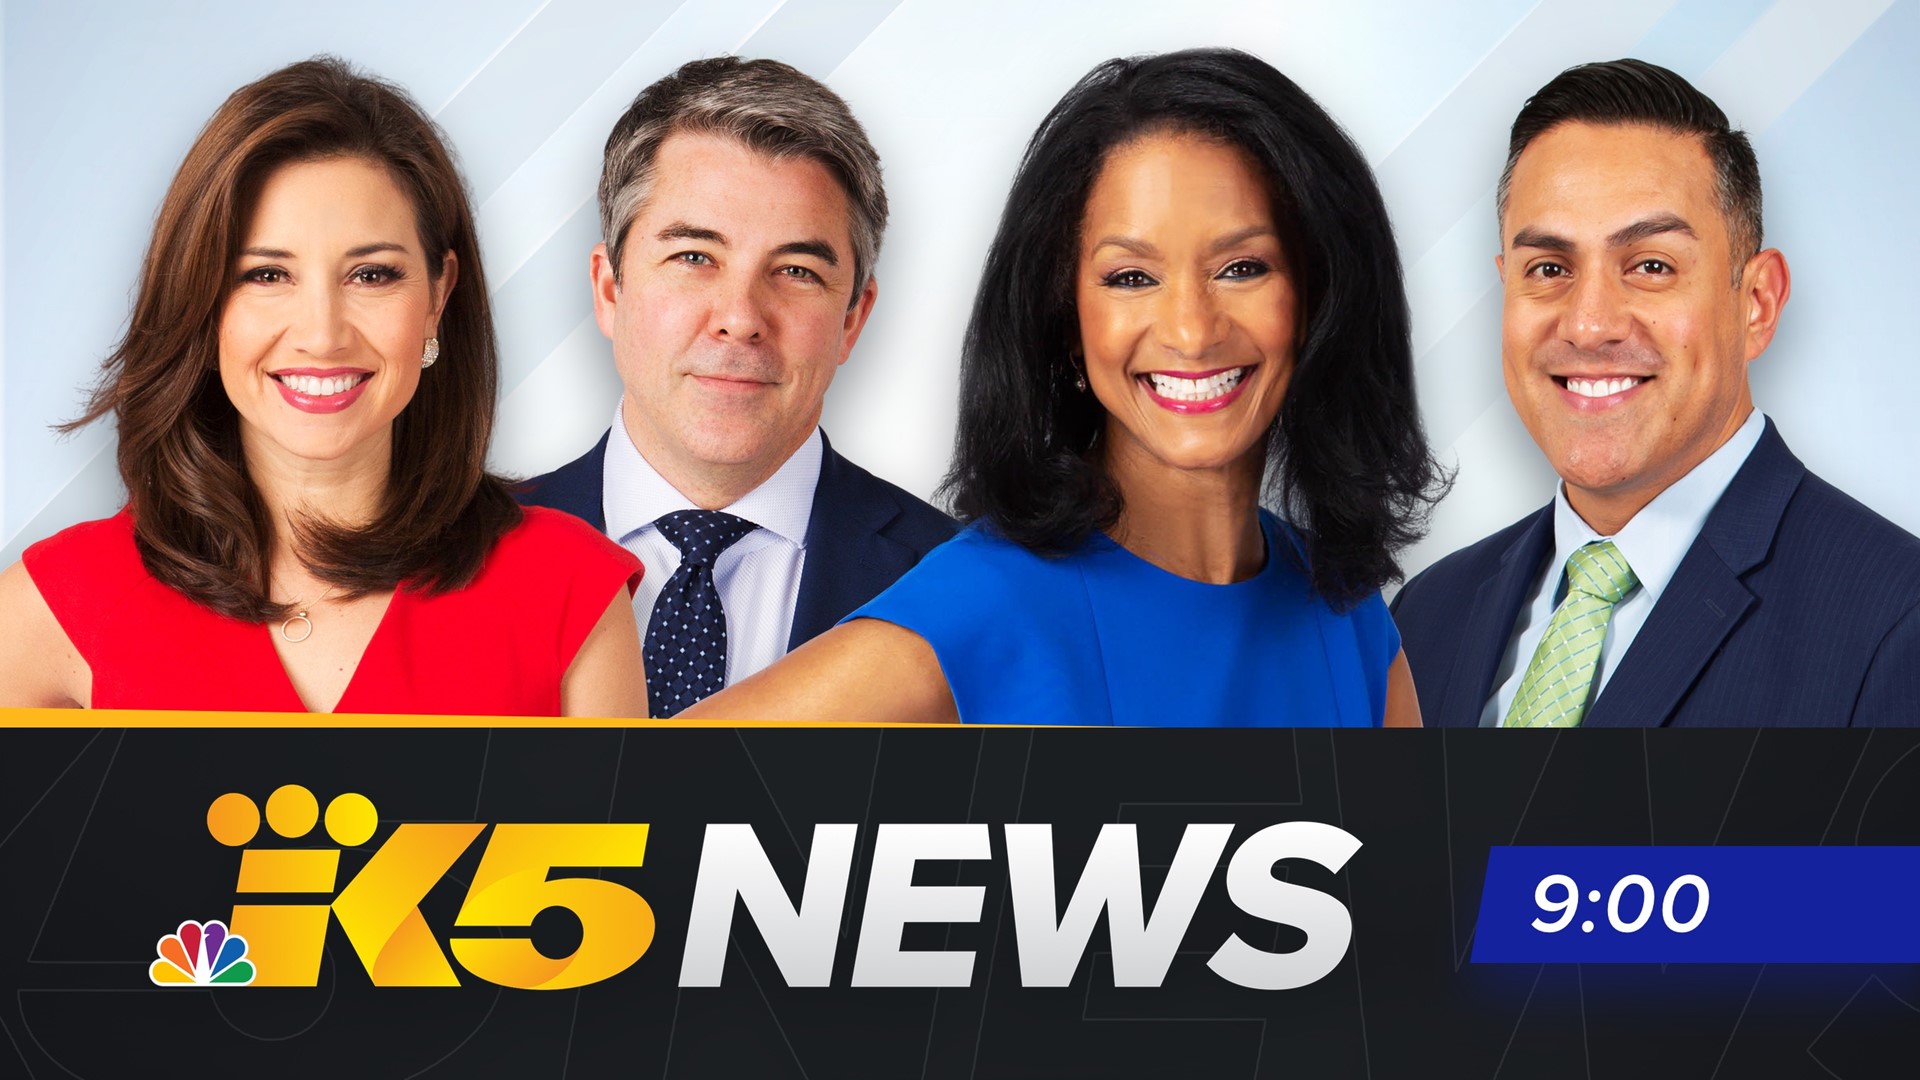 The KING 5 News Team presents the day's major news events, local sports updates, and weather forecast.